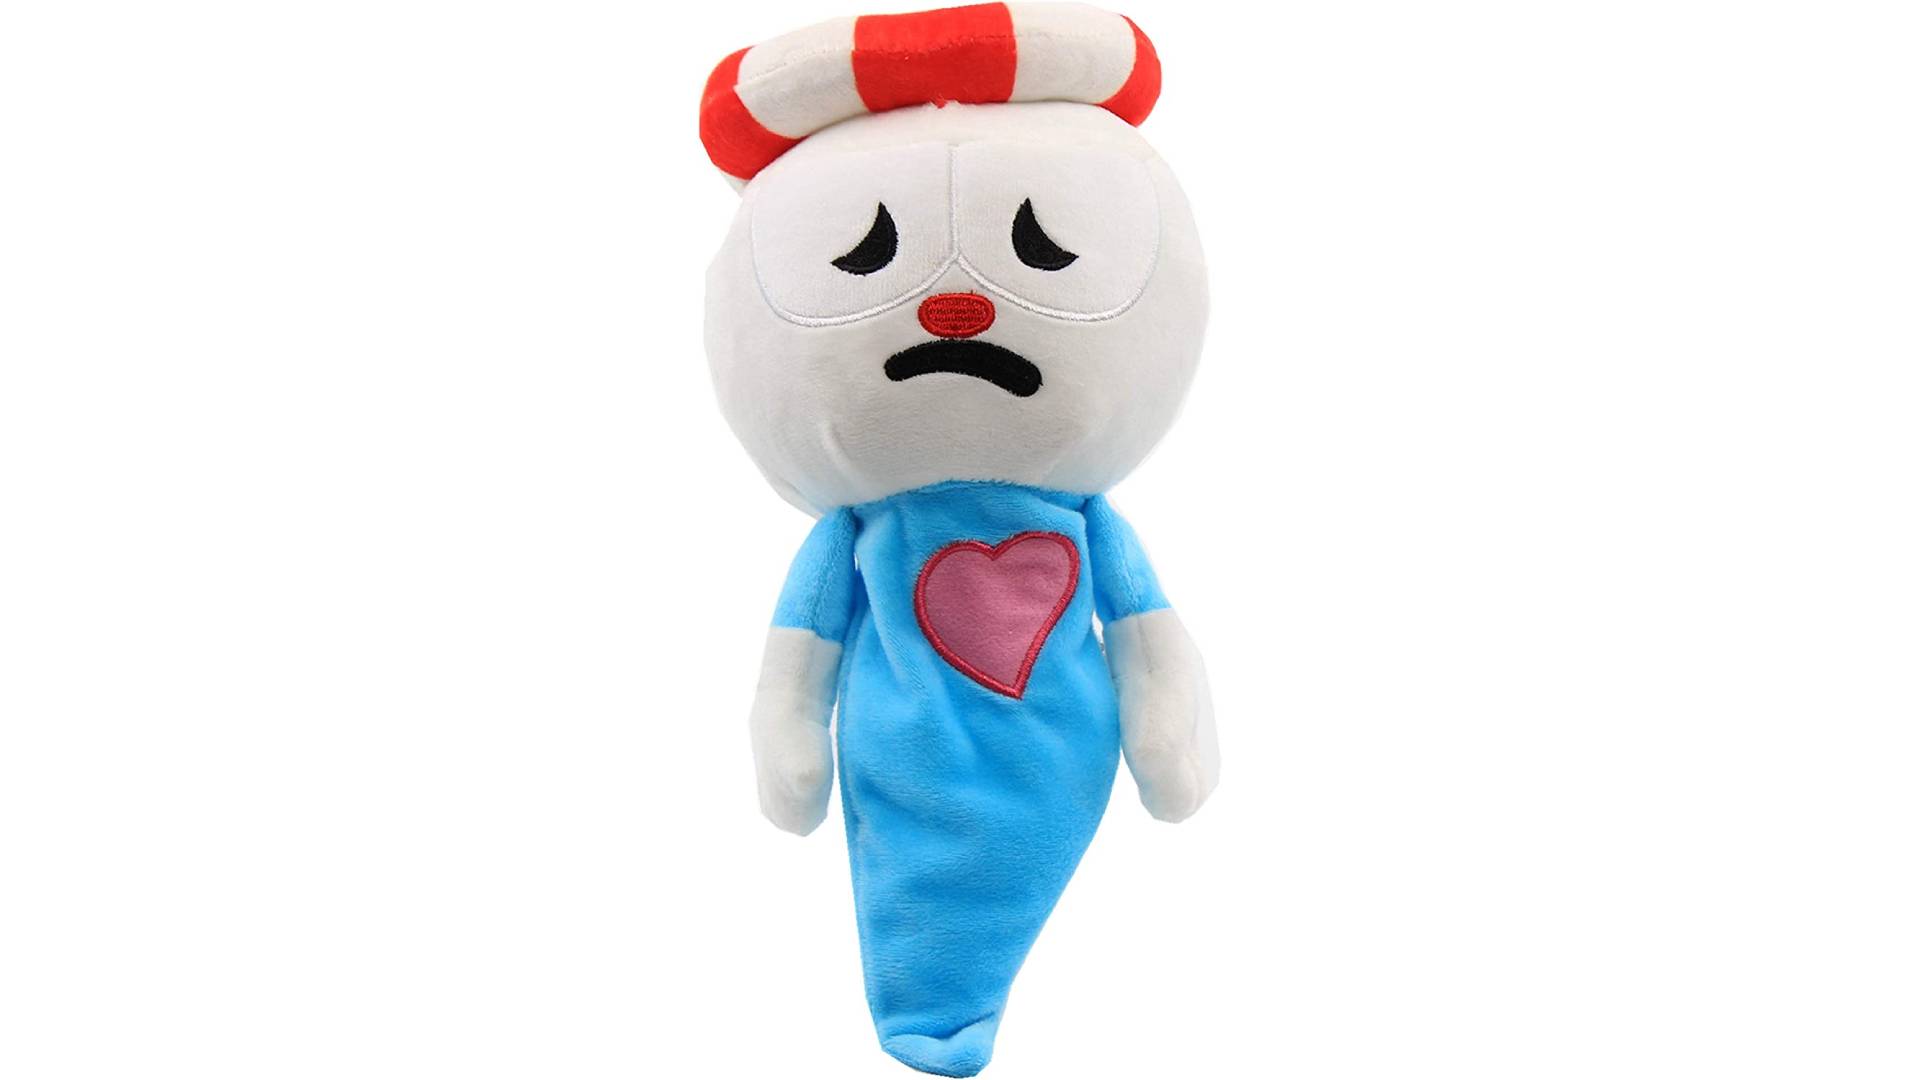 Cuphead plush: A product image shows an image of a Cuphead ghost from the game Cuphead 